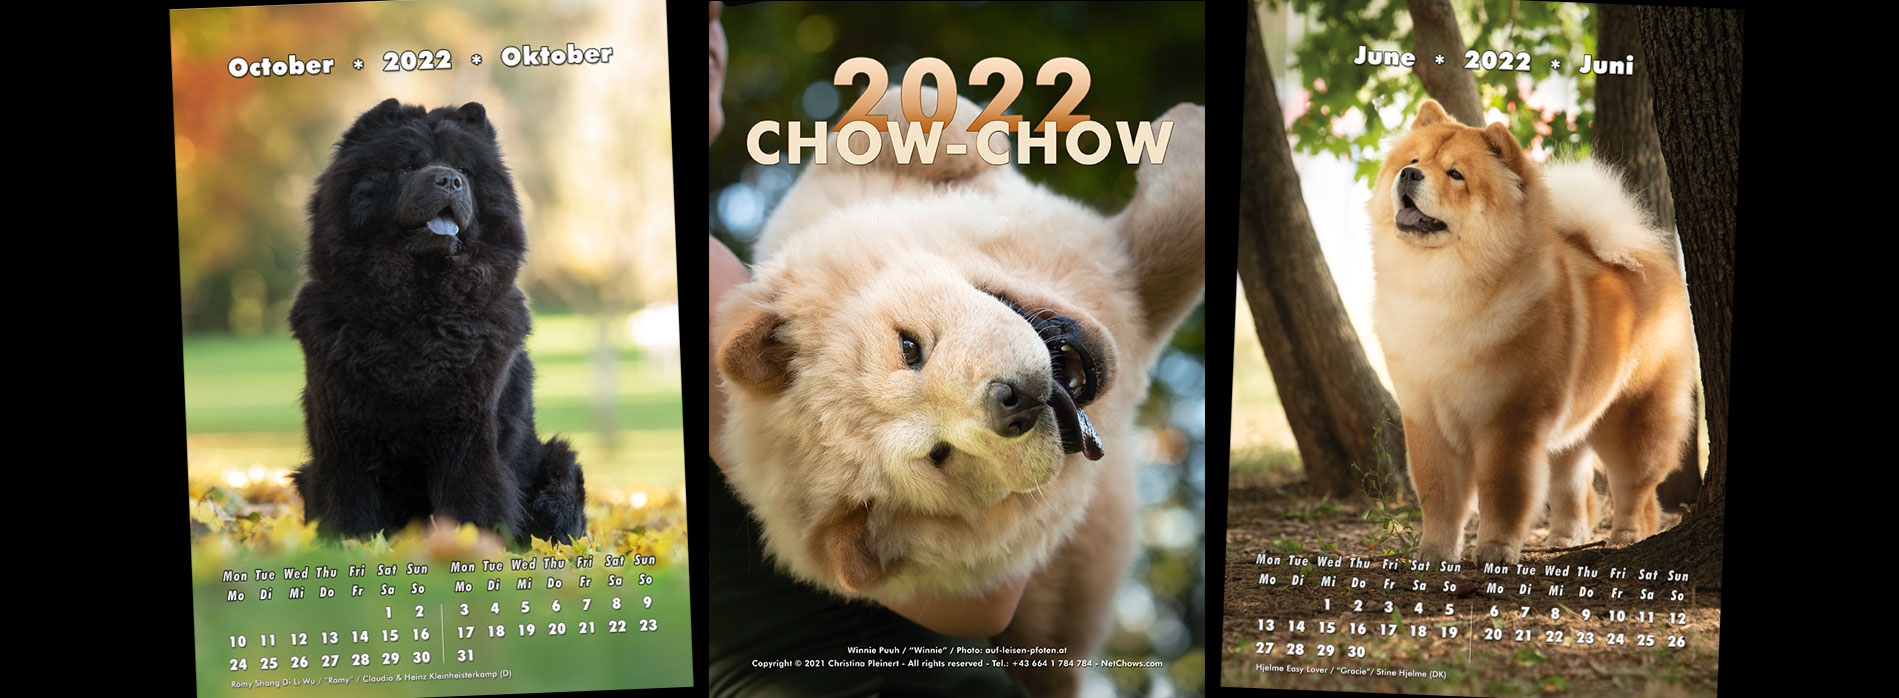 NetChows is proud to present the Chow-Chow Calendar 2022